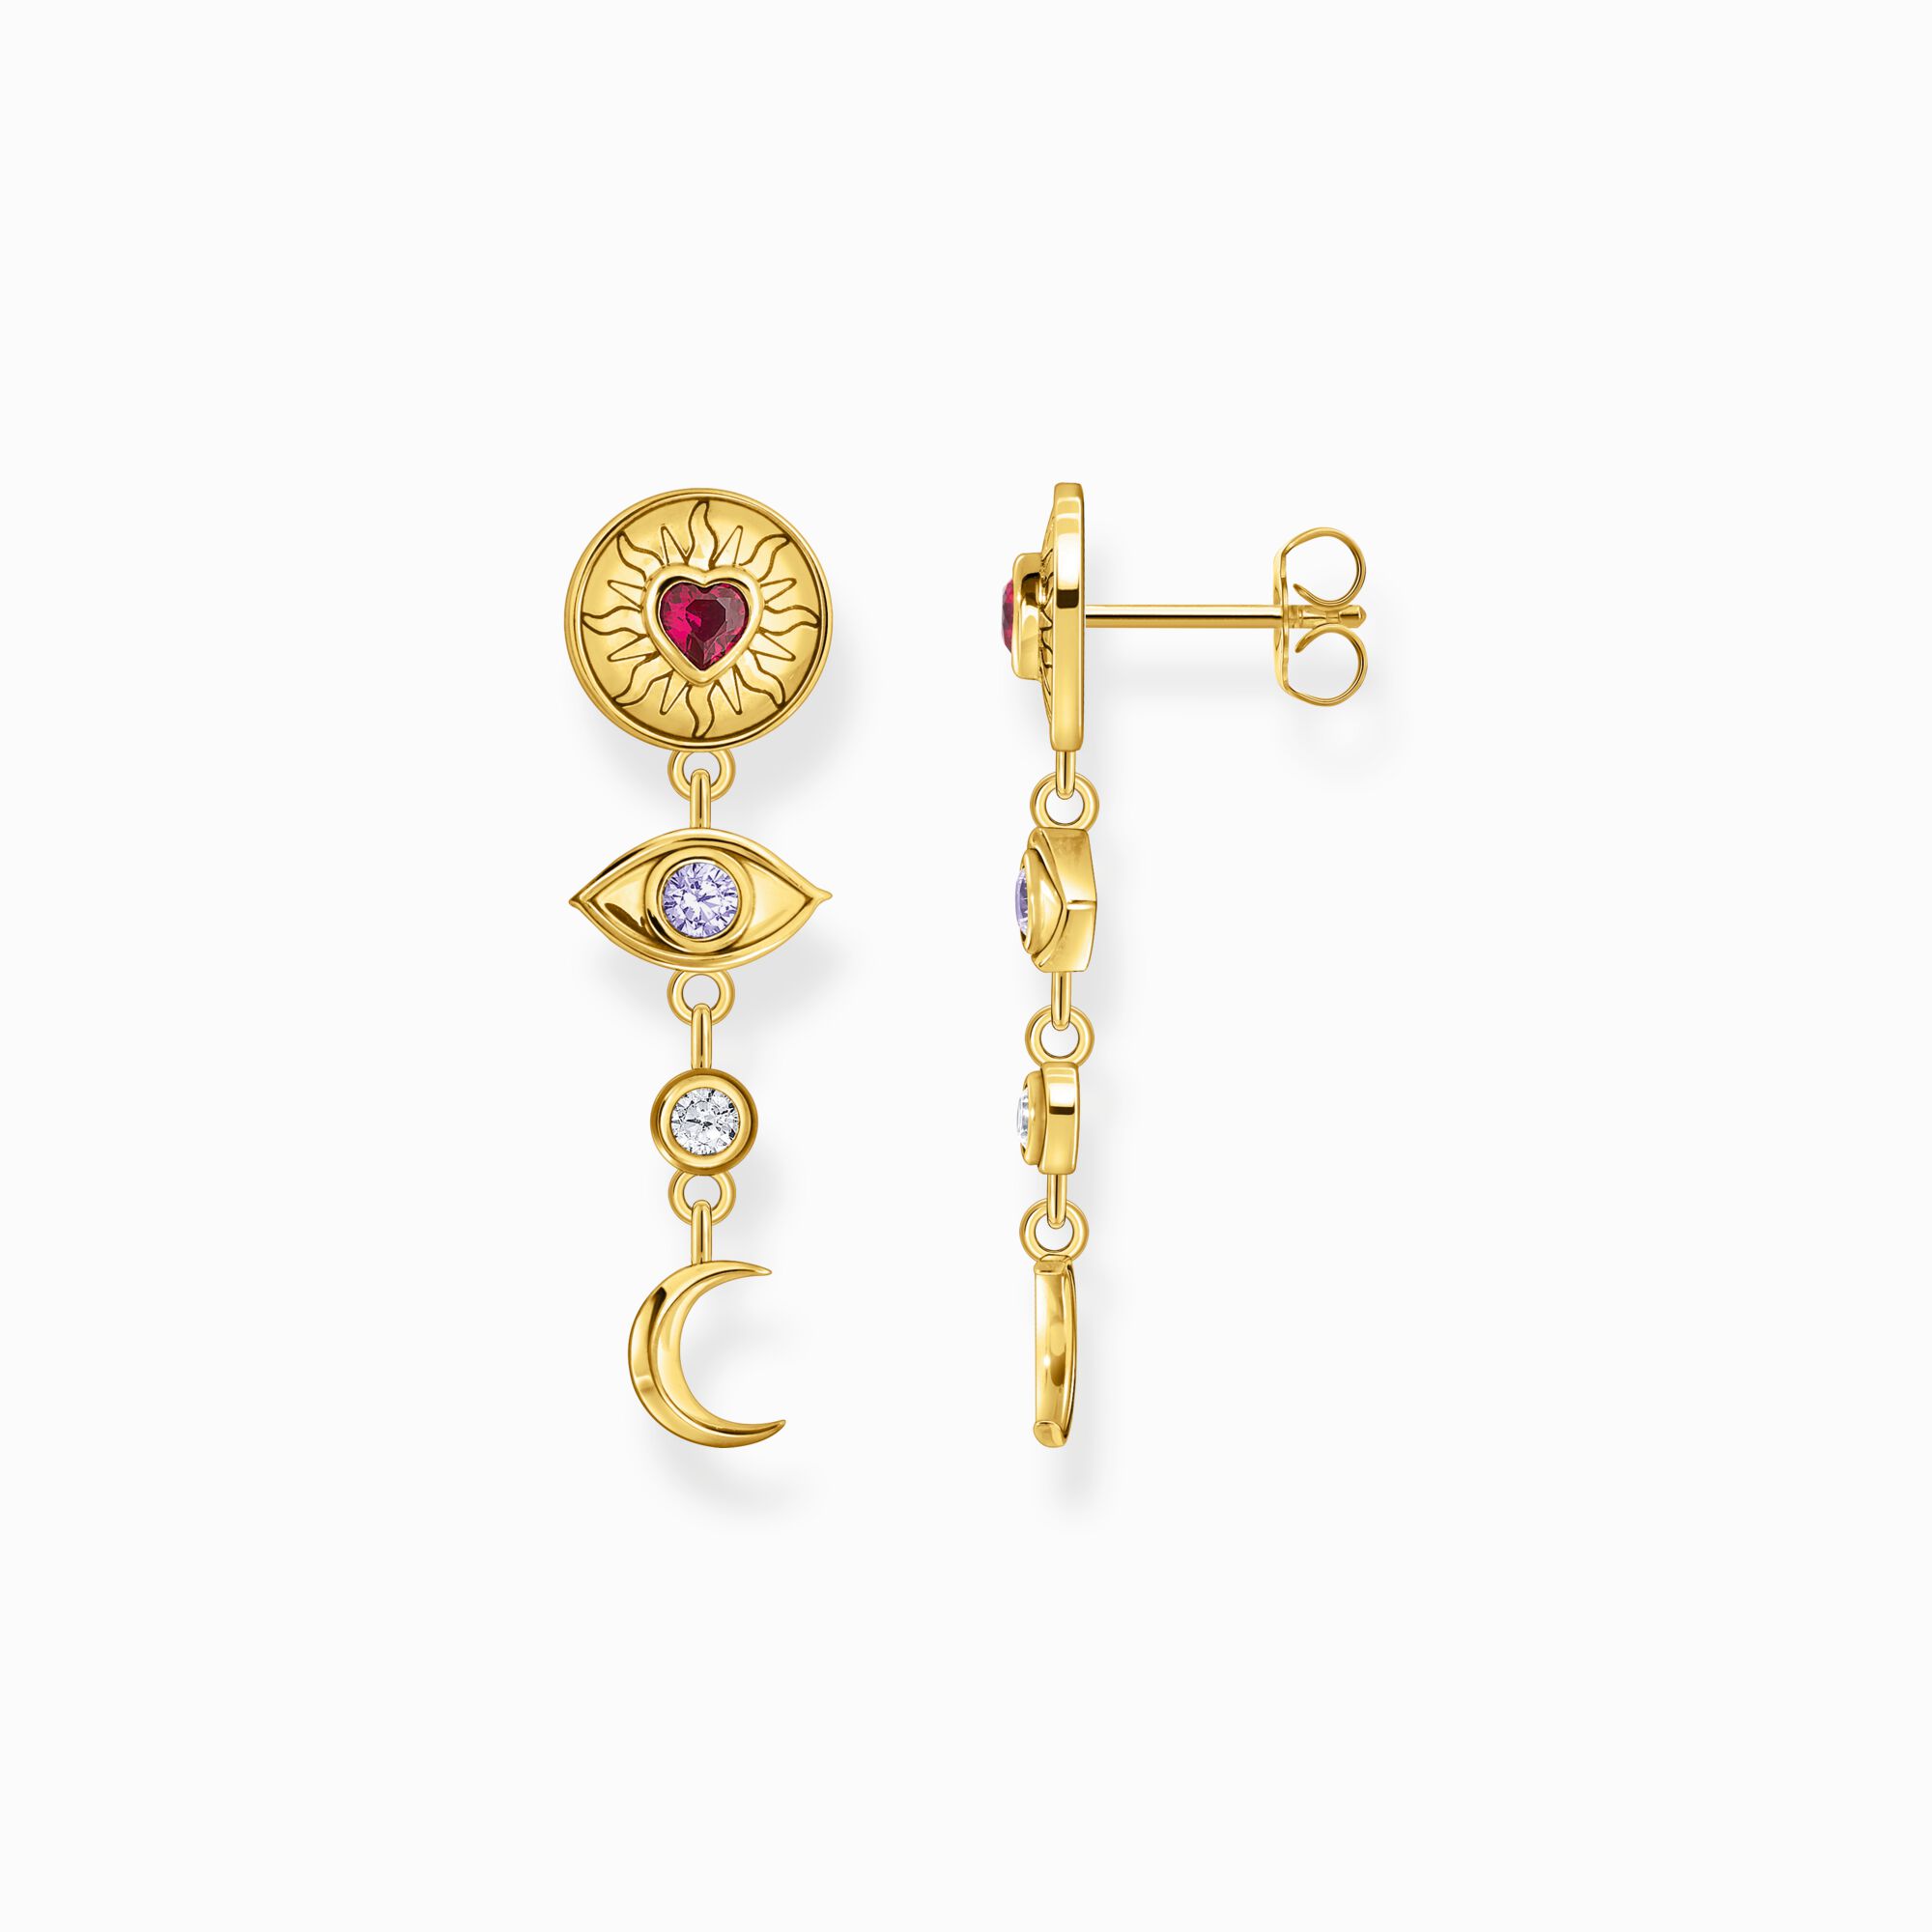 Thomas Sabo + Yellow-Gold Plated Earrings With Colourful Stones